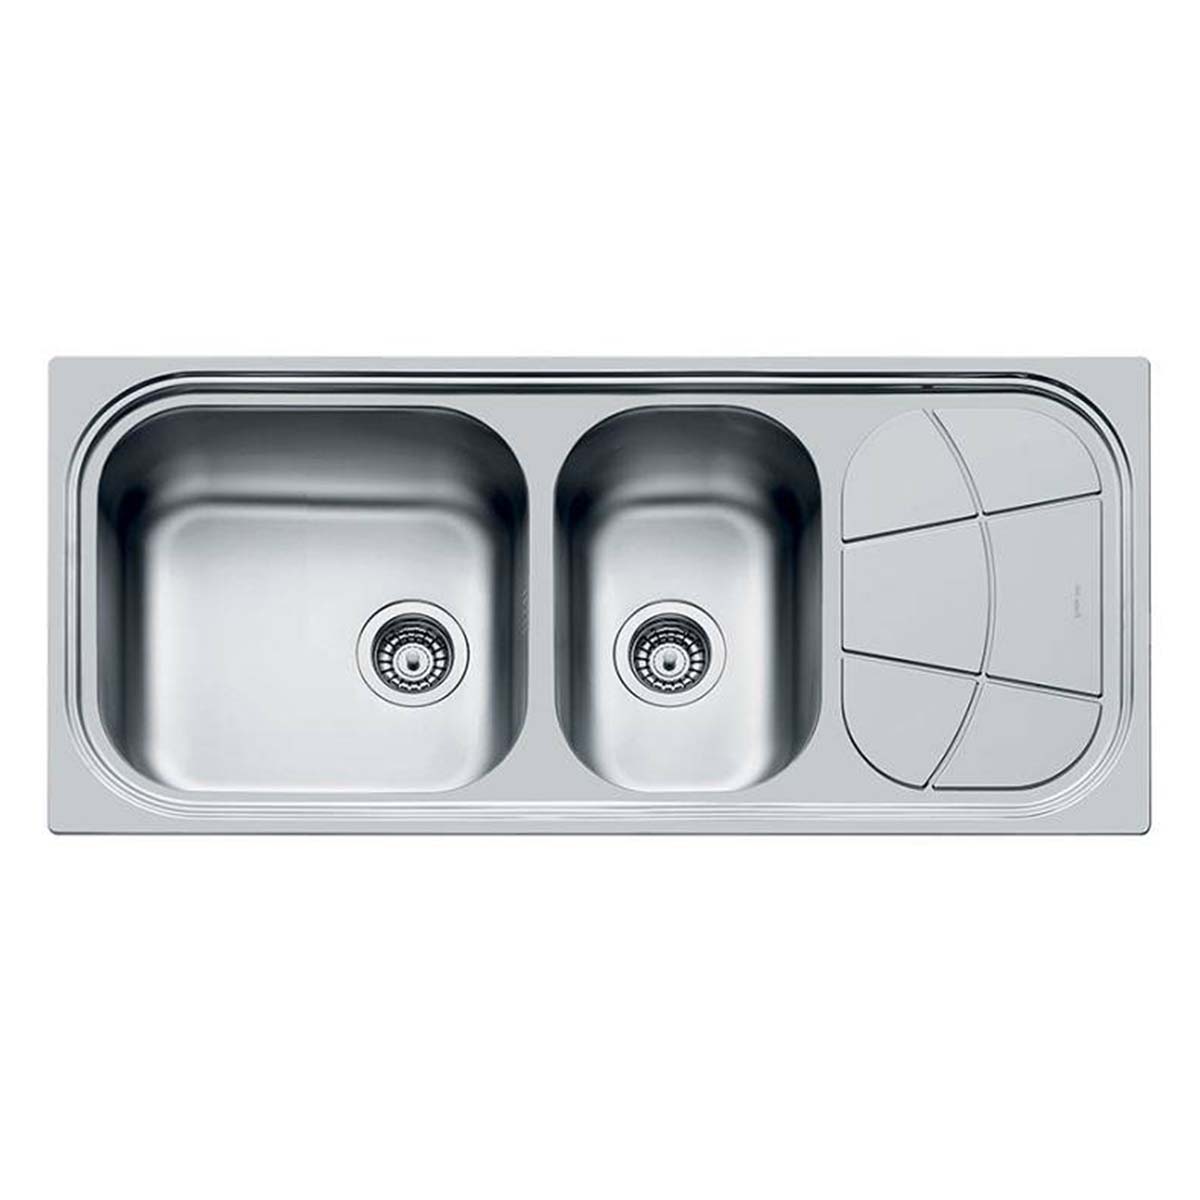 Foster Big Bowl Kitchen Sink with Drainer Bowl Left Handed Brushed Stainless Steel